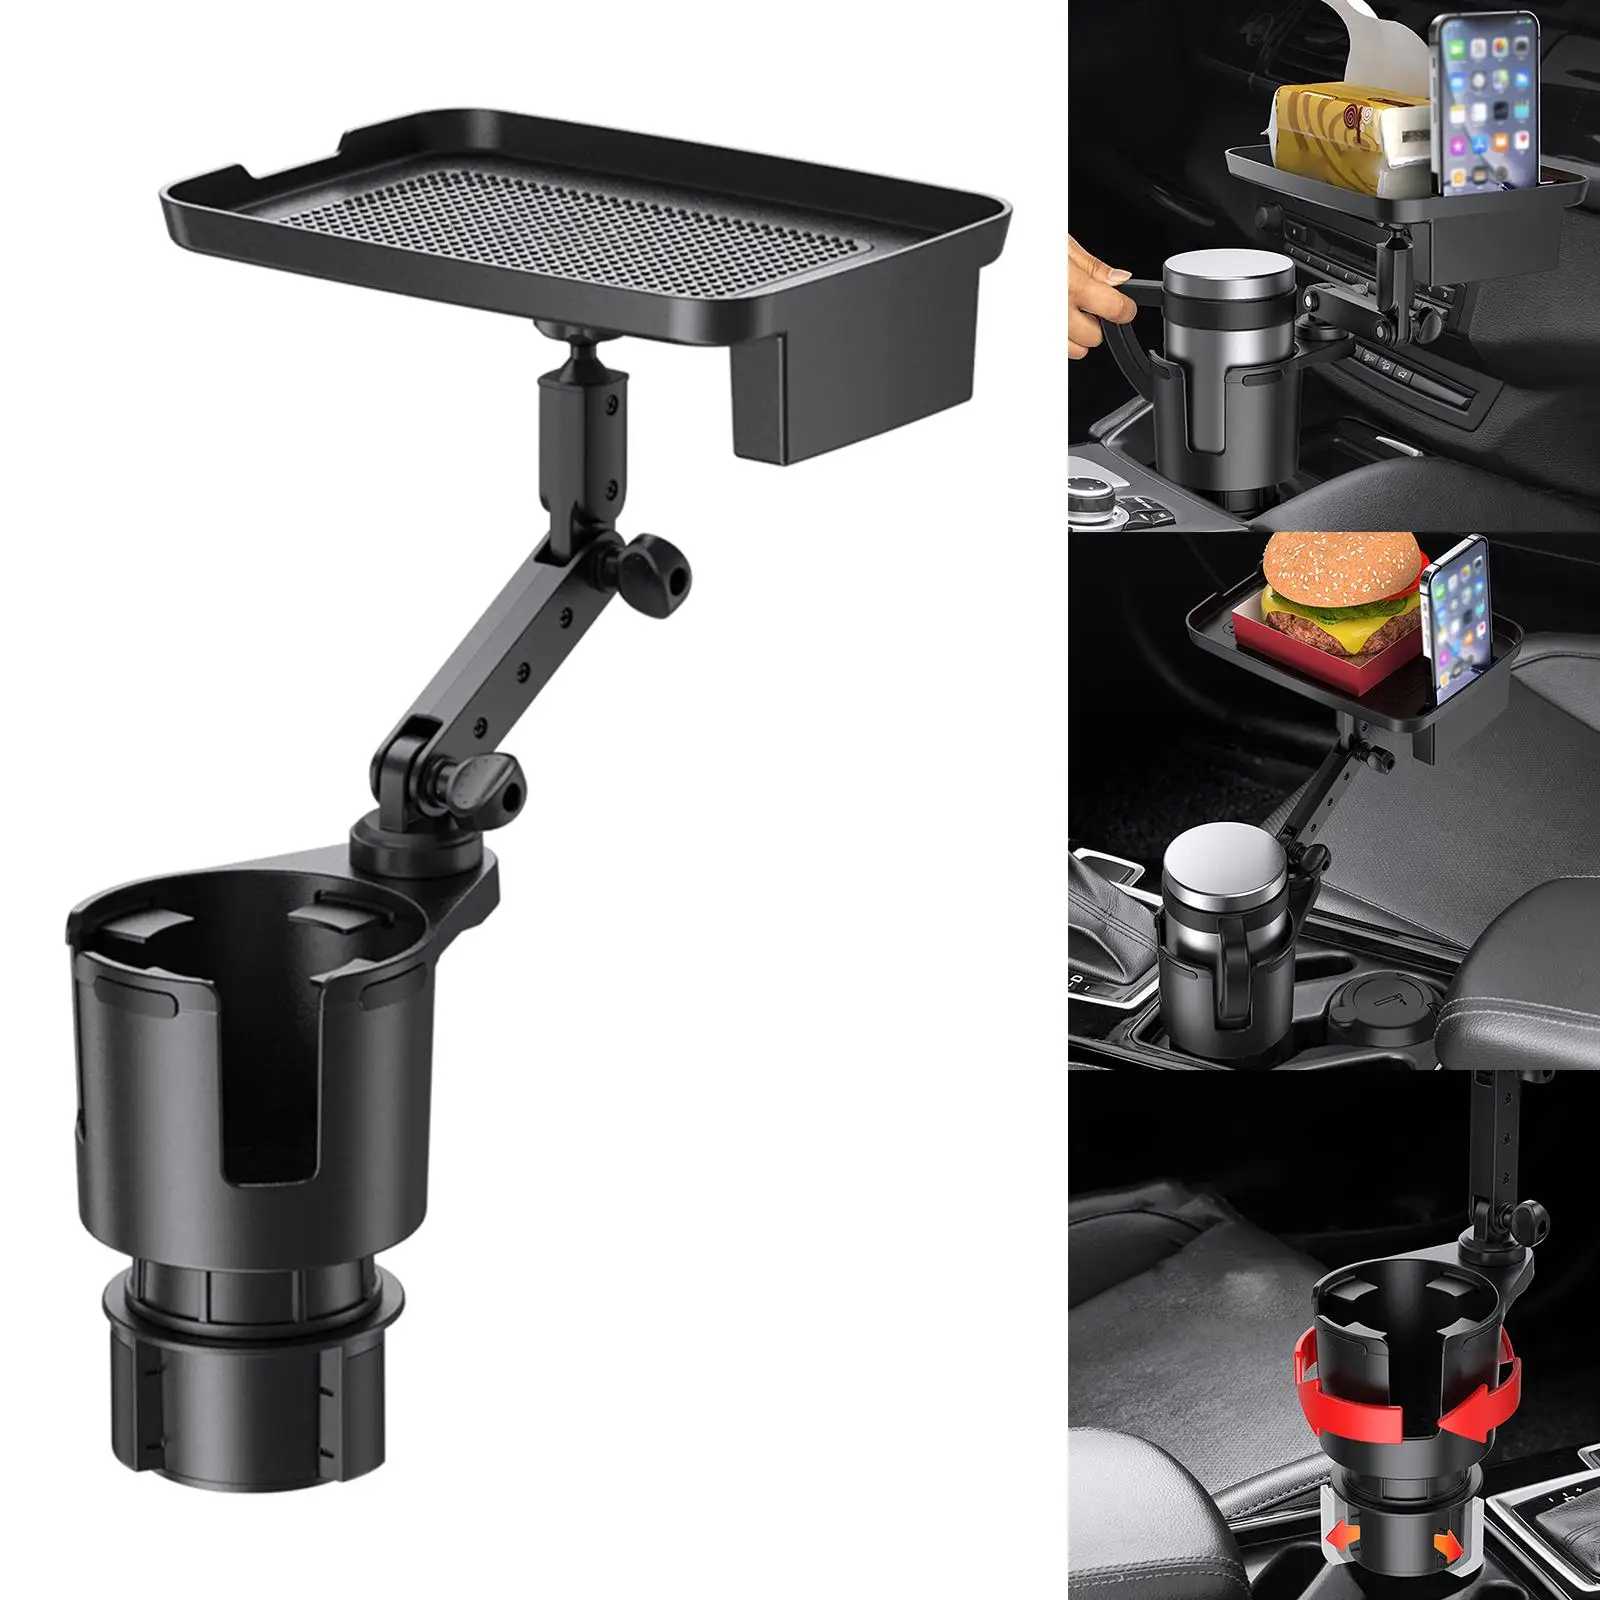 Car Cup Holder Expander Storage Tray auto Adjustable Retractable Portable Black Adapter for Water Cups Beverage Cups